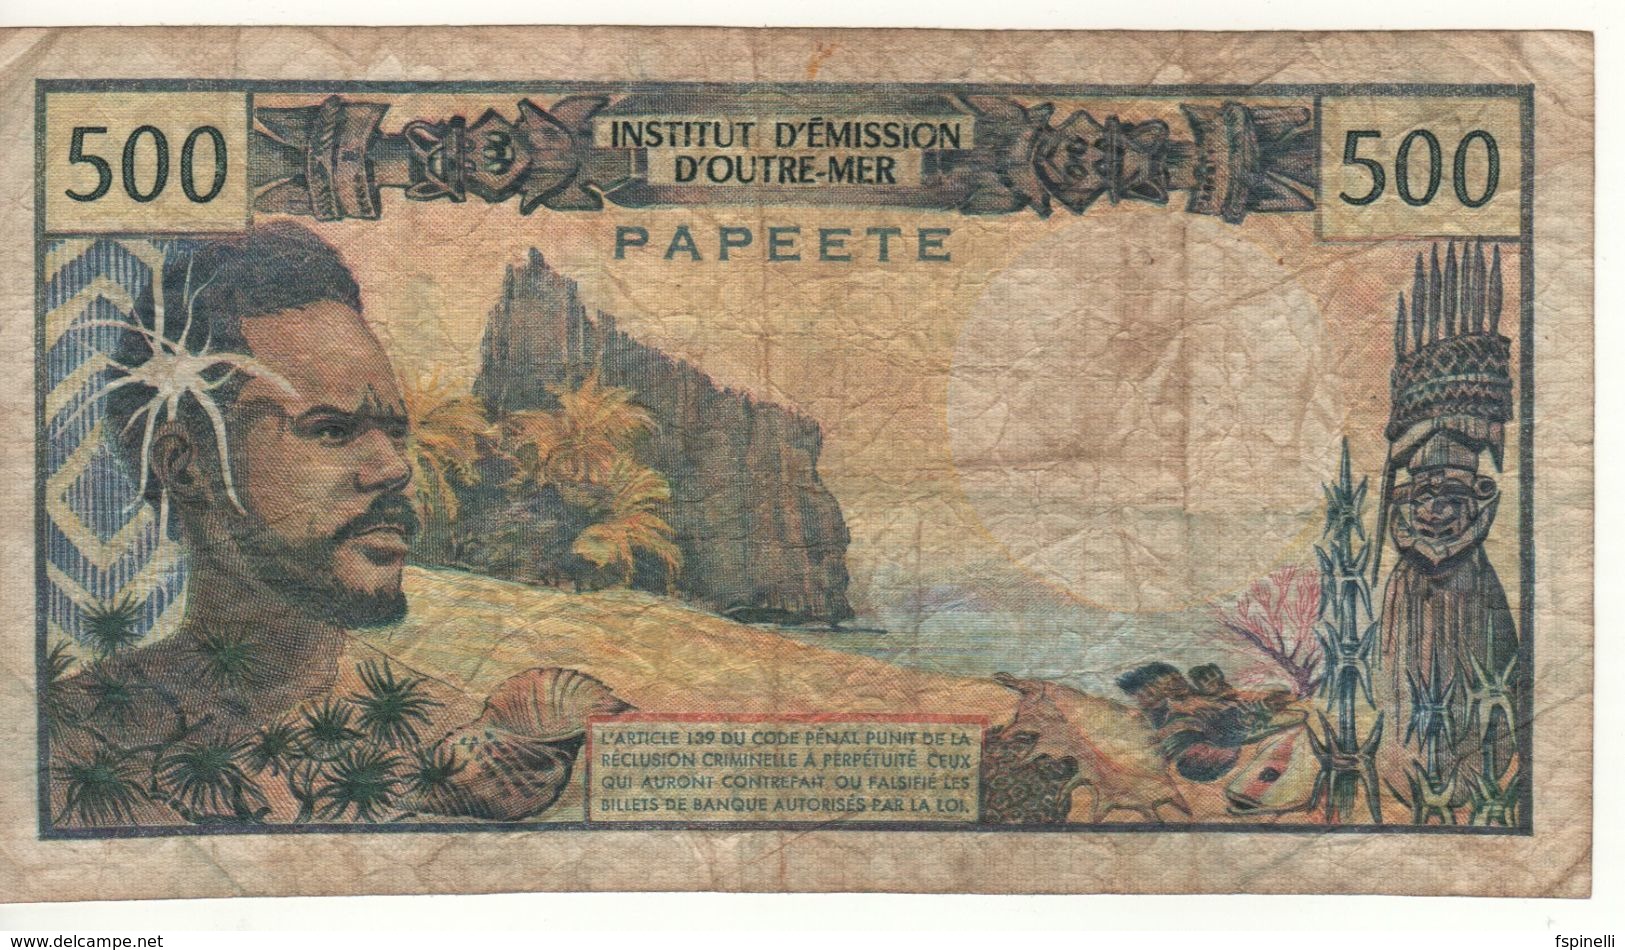 TAHITI   500 Francs INSTITUT D'ÉMISSION D'OUTRE-MER-Papeete   (ND 1985) - Papeete (French Polynesia 1914-1985)